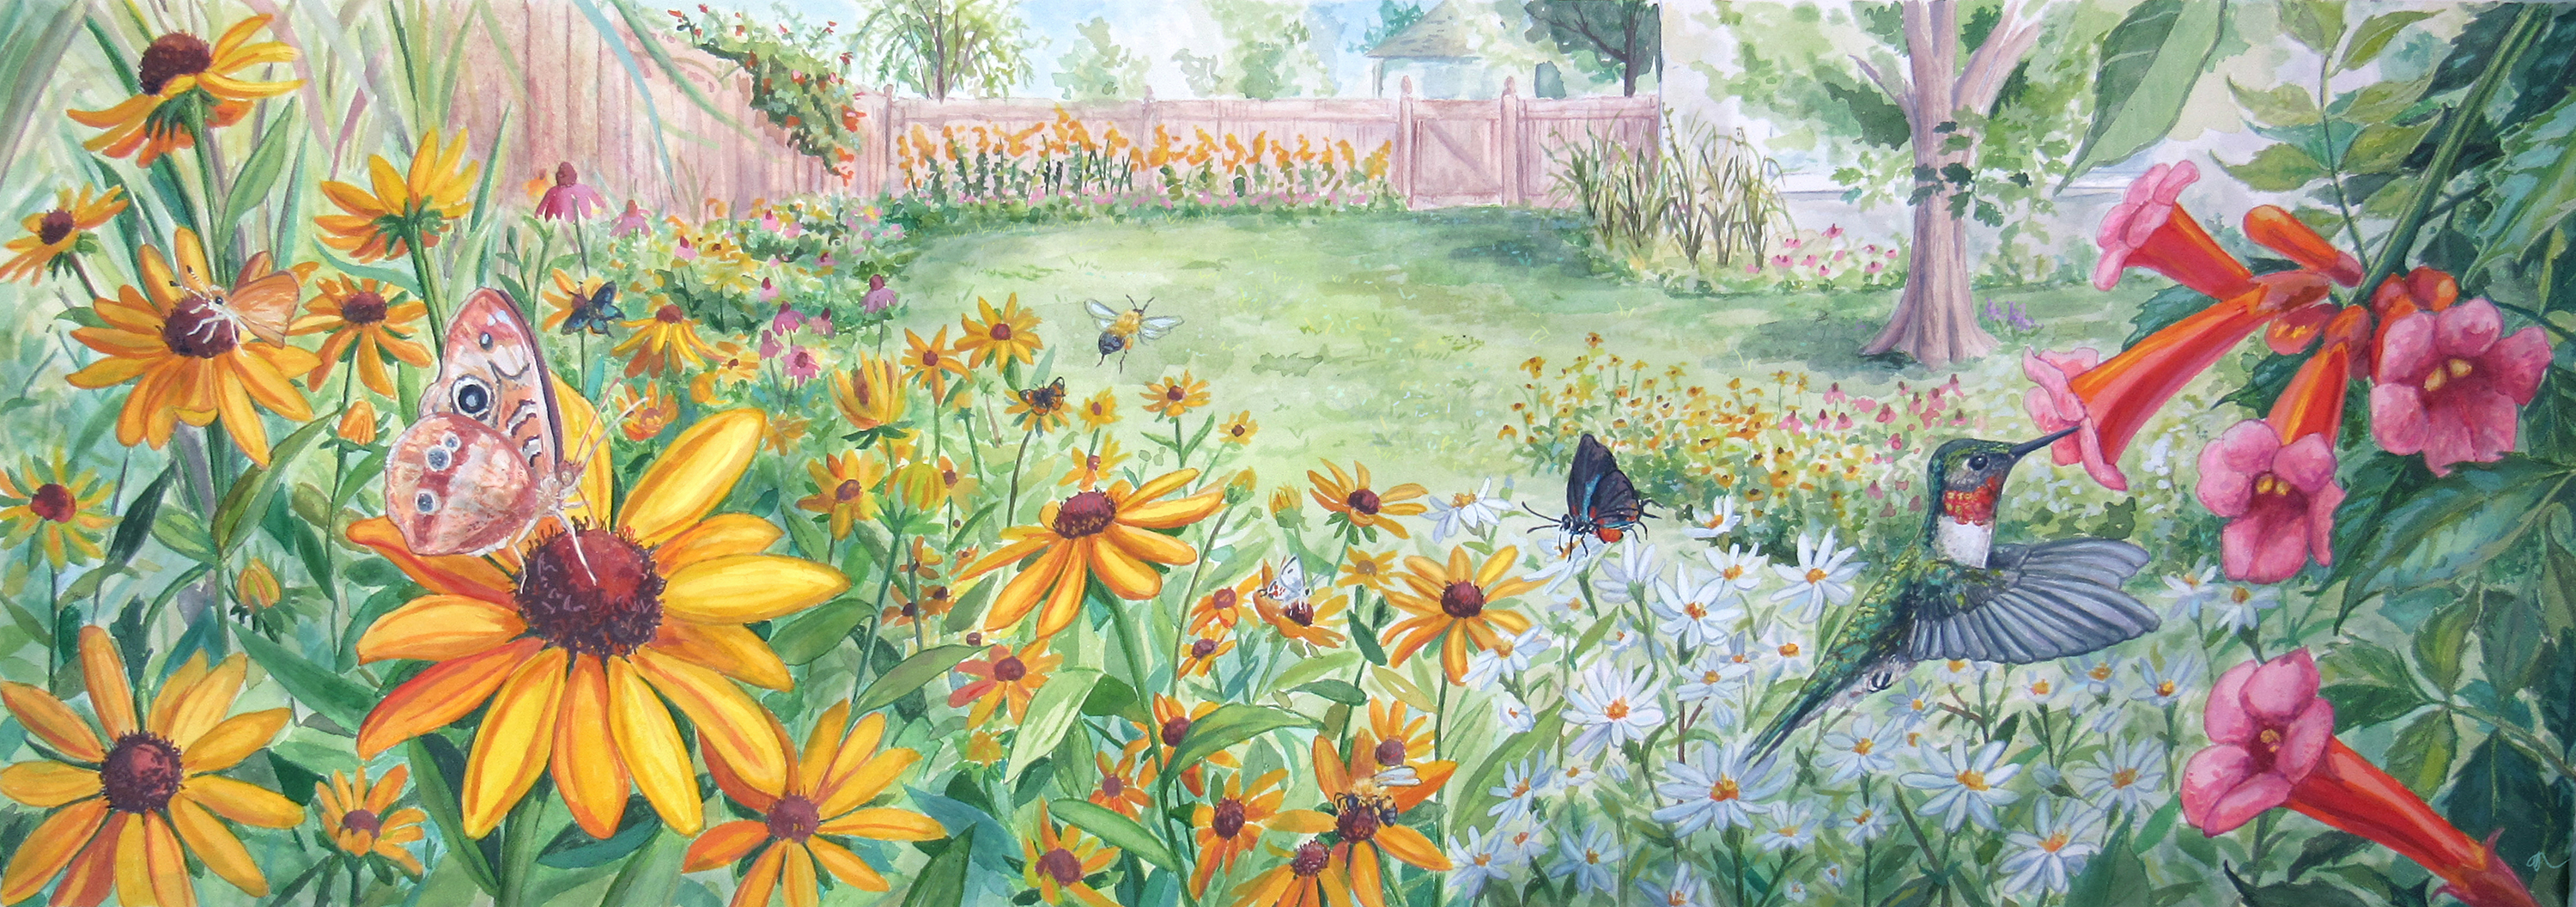 Watercolor illustration showing a backyard garden of native plants. A brown butterfly sits on a yellow flower in the left foreground. A ruby-throated hummingbird hovers next to a flower on the right.